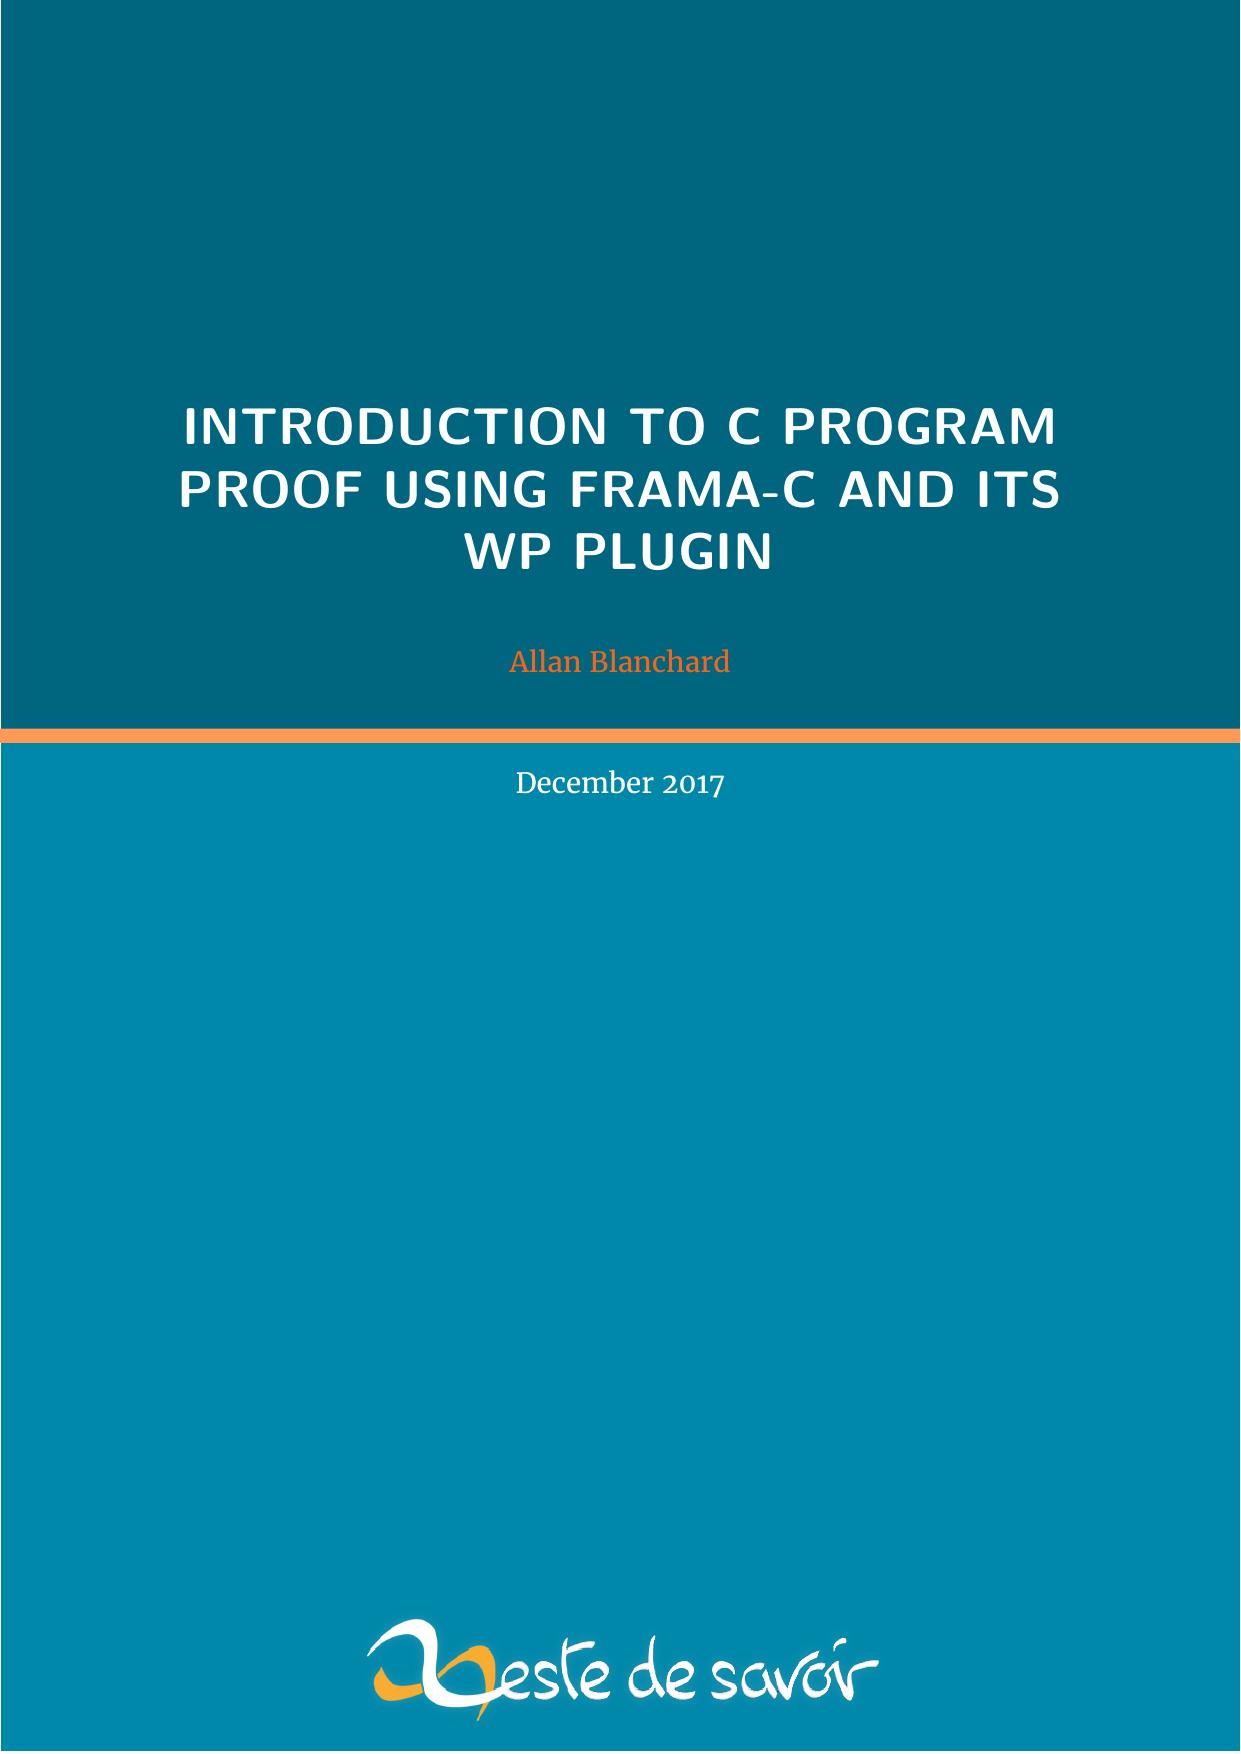 INTRODUCTION TO C PROGRAM PROOF USING FRAMA-C AND ITS WP PLUGIN